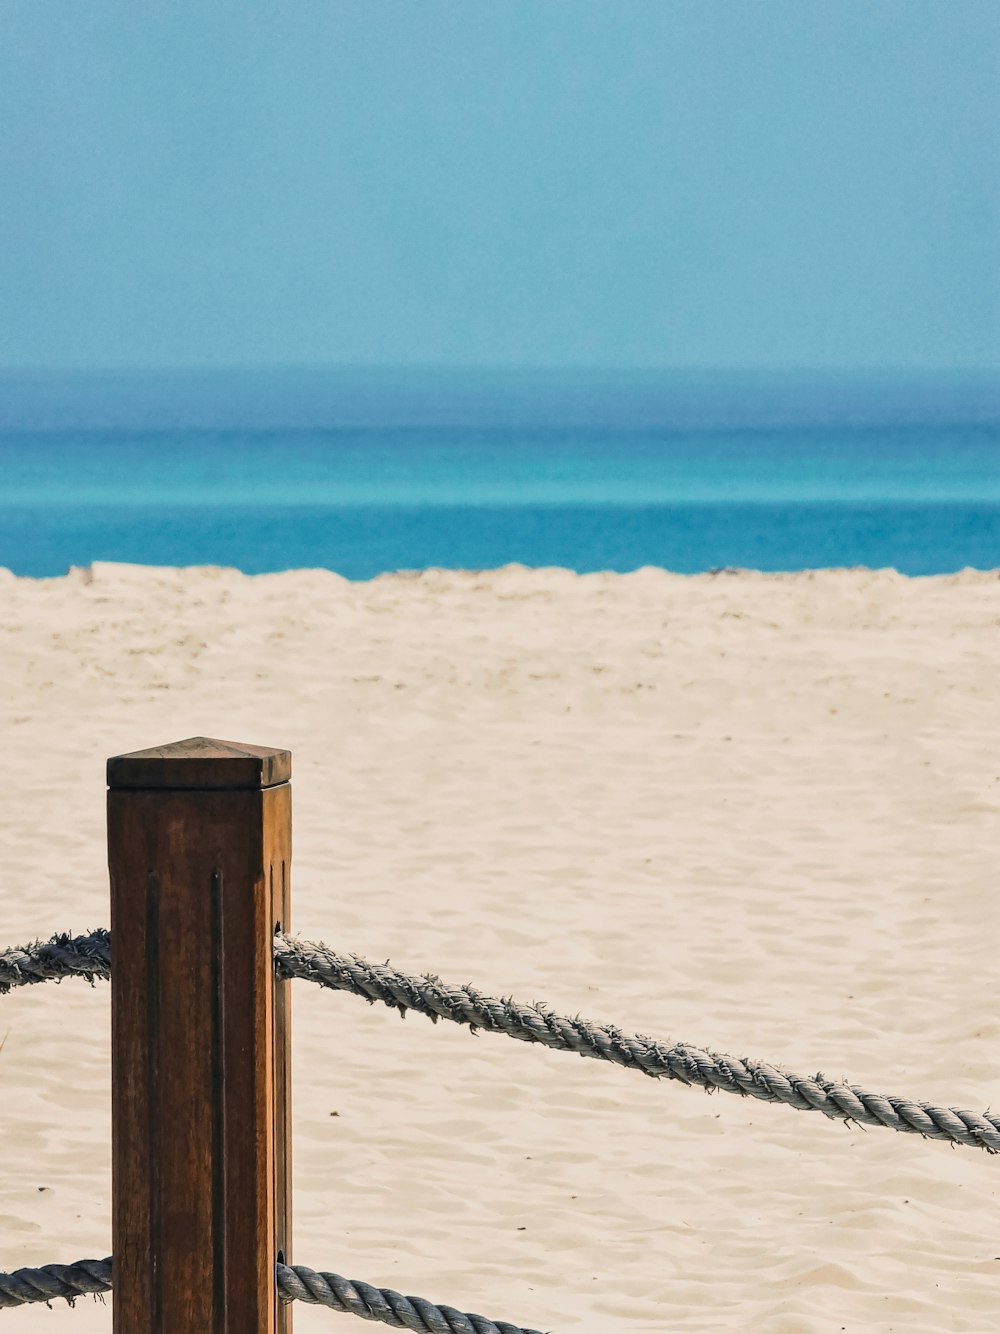 a wooden post on a beach next to a rope fence